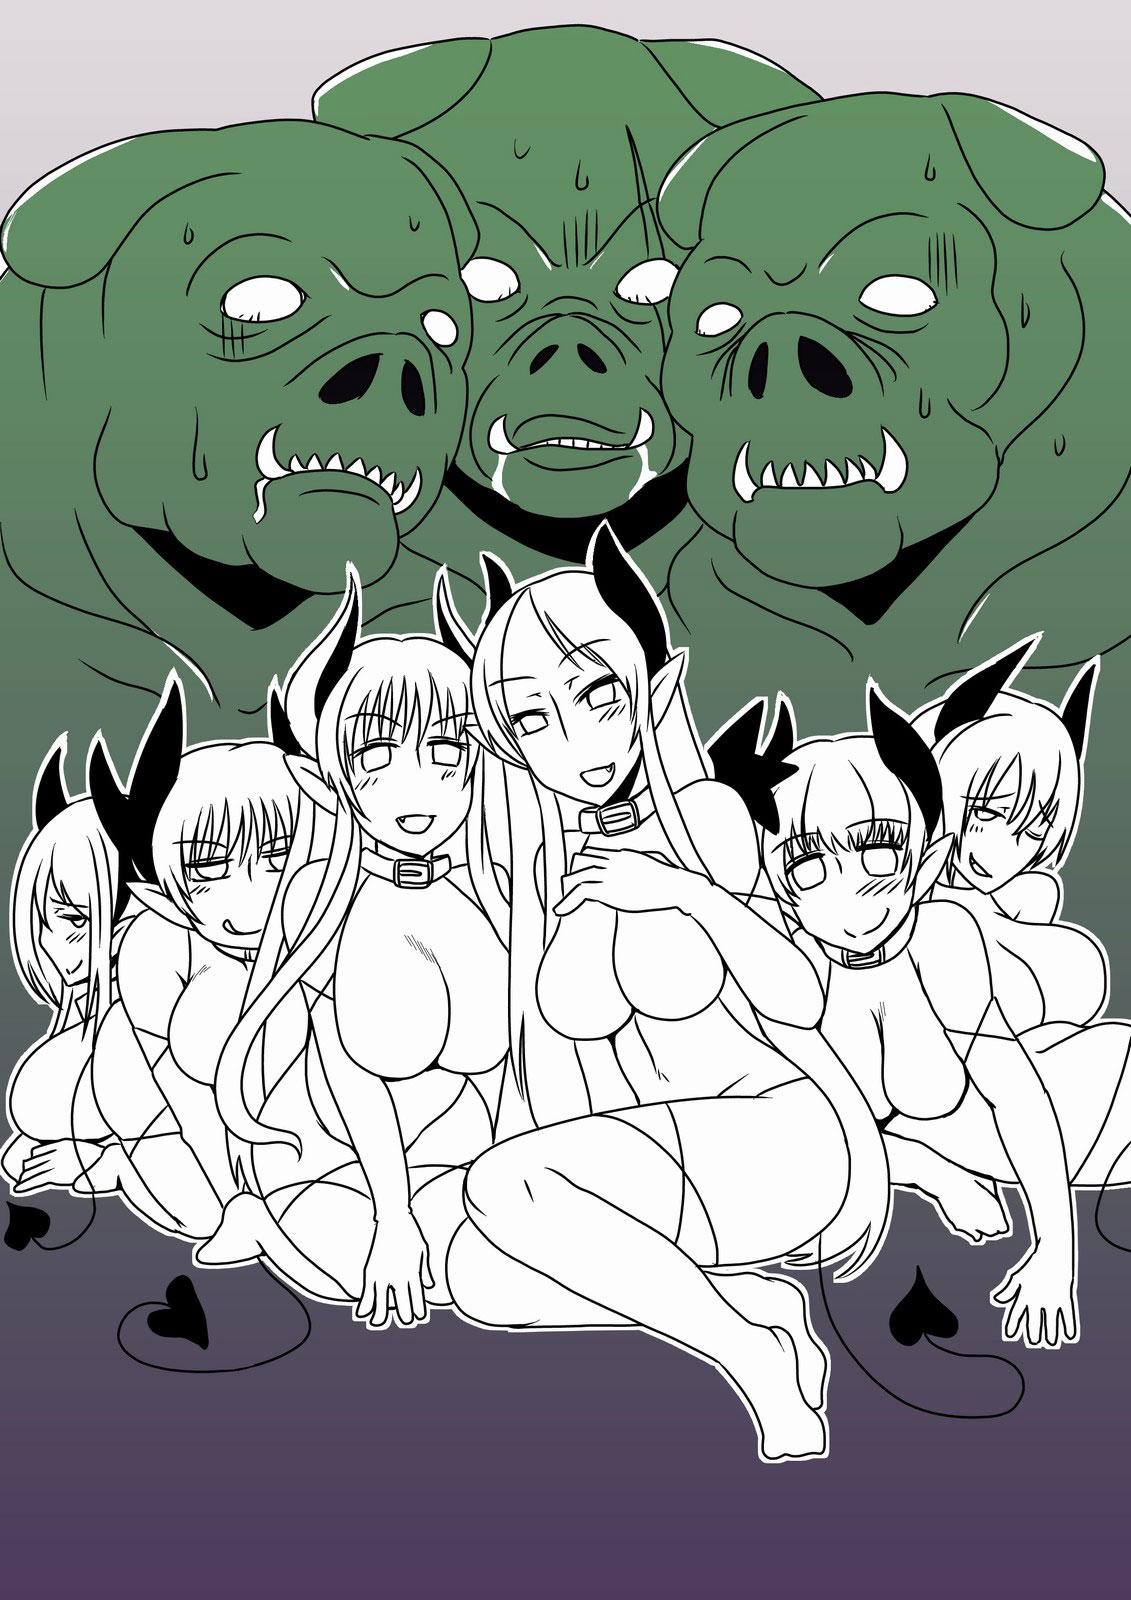 Girl Fucked Hard Orc Dakara Elf Osotta Zenin Succubus Datta wa. | We Assaulted Some Elves Because We're Orcs But It Turns Out They Were All Actually Succubi Mexico - Page 26